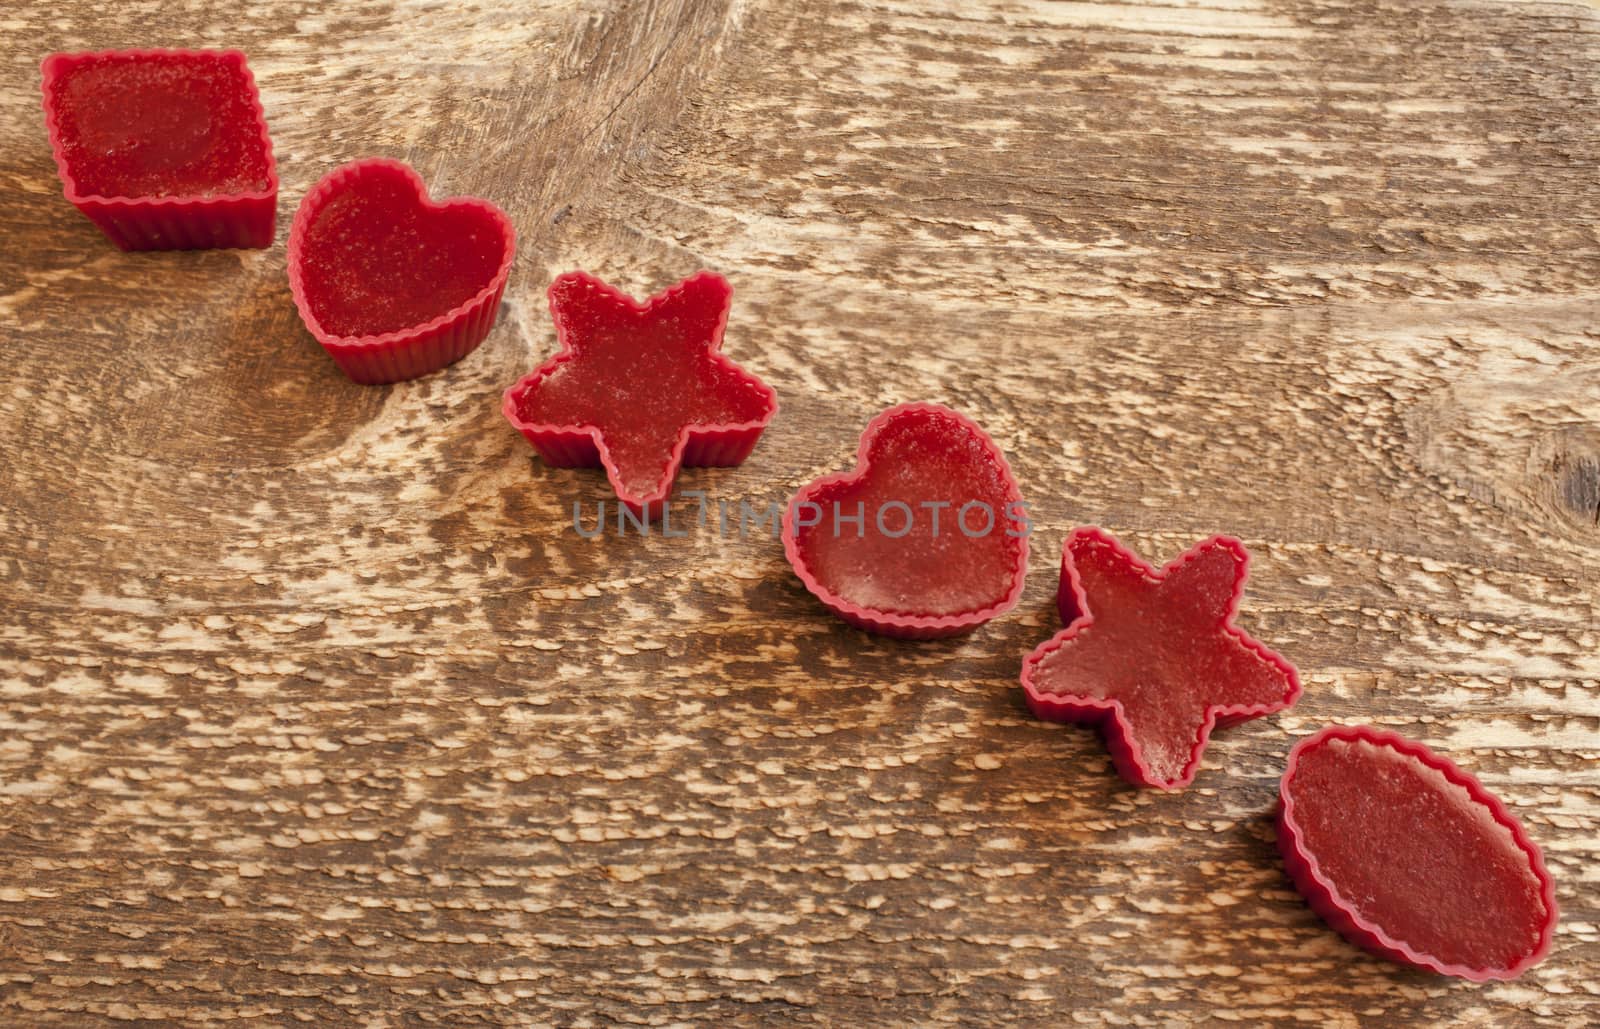 handmade Red marmalade in molds on wooden background flat lay